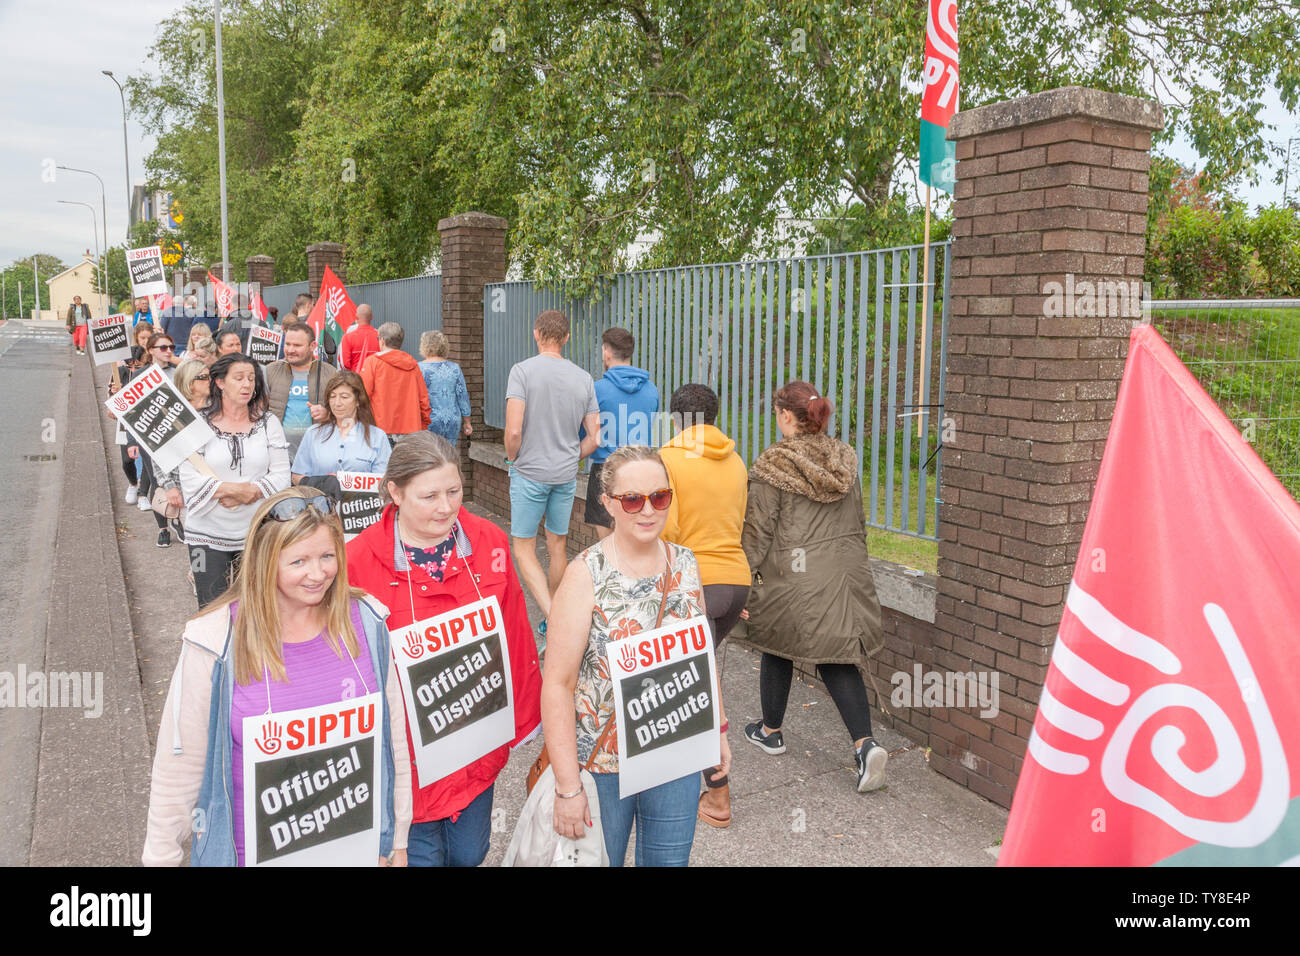 Cork City, Cork, Ireland. 26th June, 2019.  Strikers picketing outside Cork University Hospital in Cork City as part of their third 24-hour work stoppage by members of the Services, Industrial, Professional and Technical Union (SIPTU) in support of pay and staffing claim.  SIPTU are demanding pay rises for members worth over €19m that it says are due under a job evaluation scheme. The union says the increases are worth €1,500 to €3,000 for each member. Credit: David Creedon/Alamy Live News Stock Photo